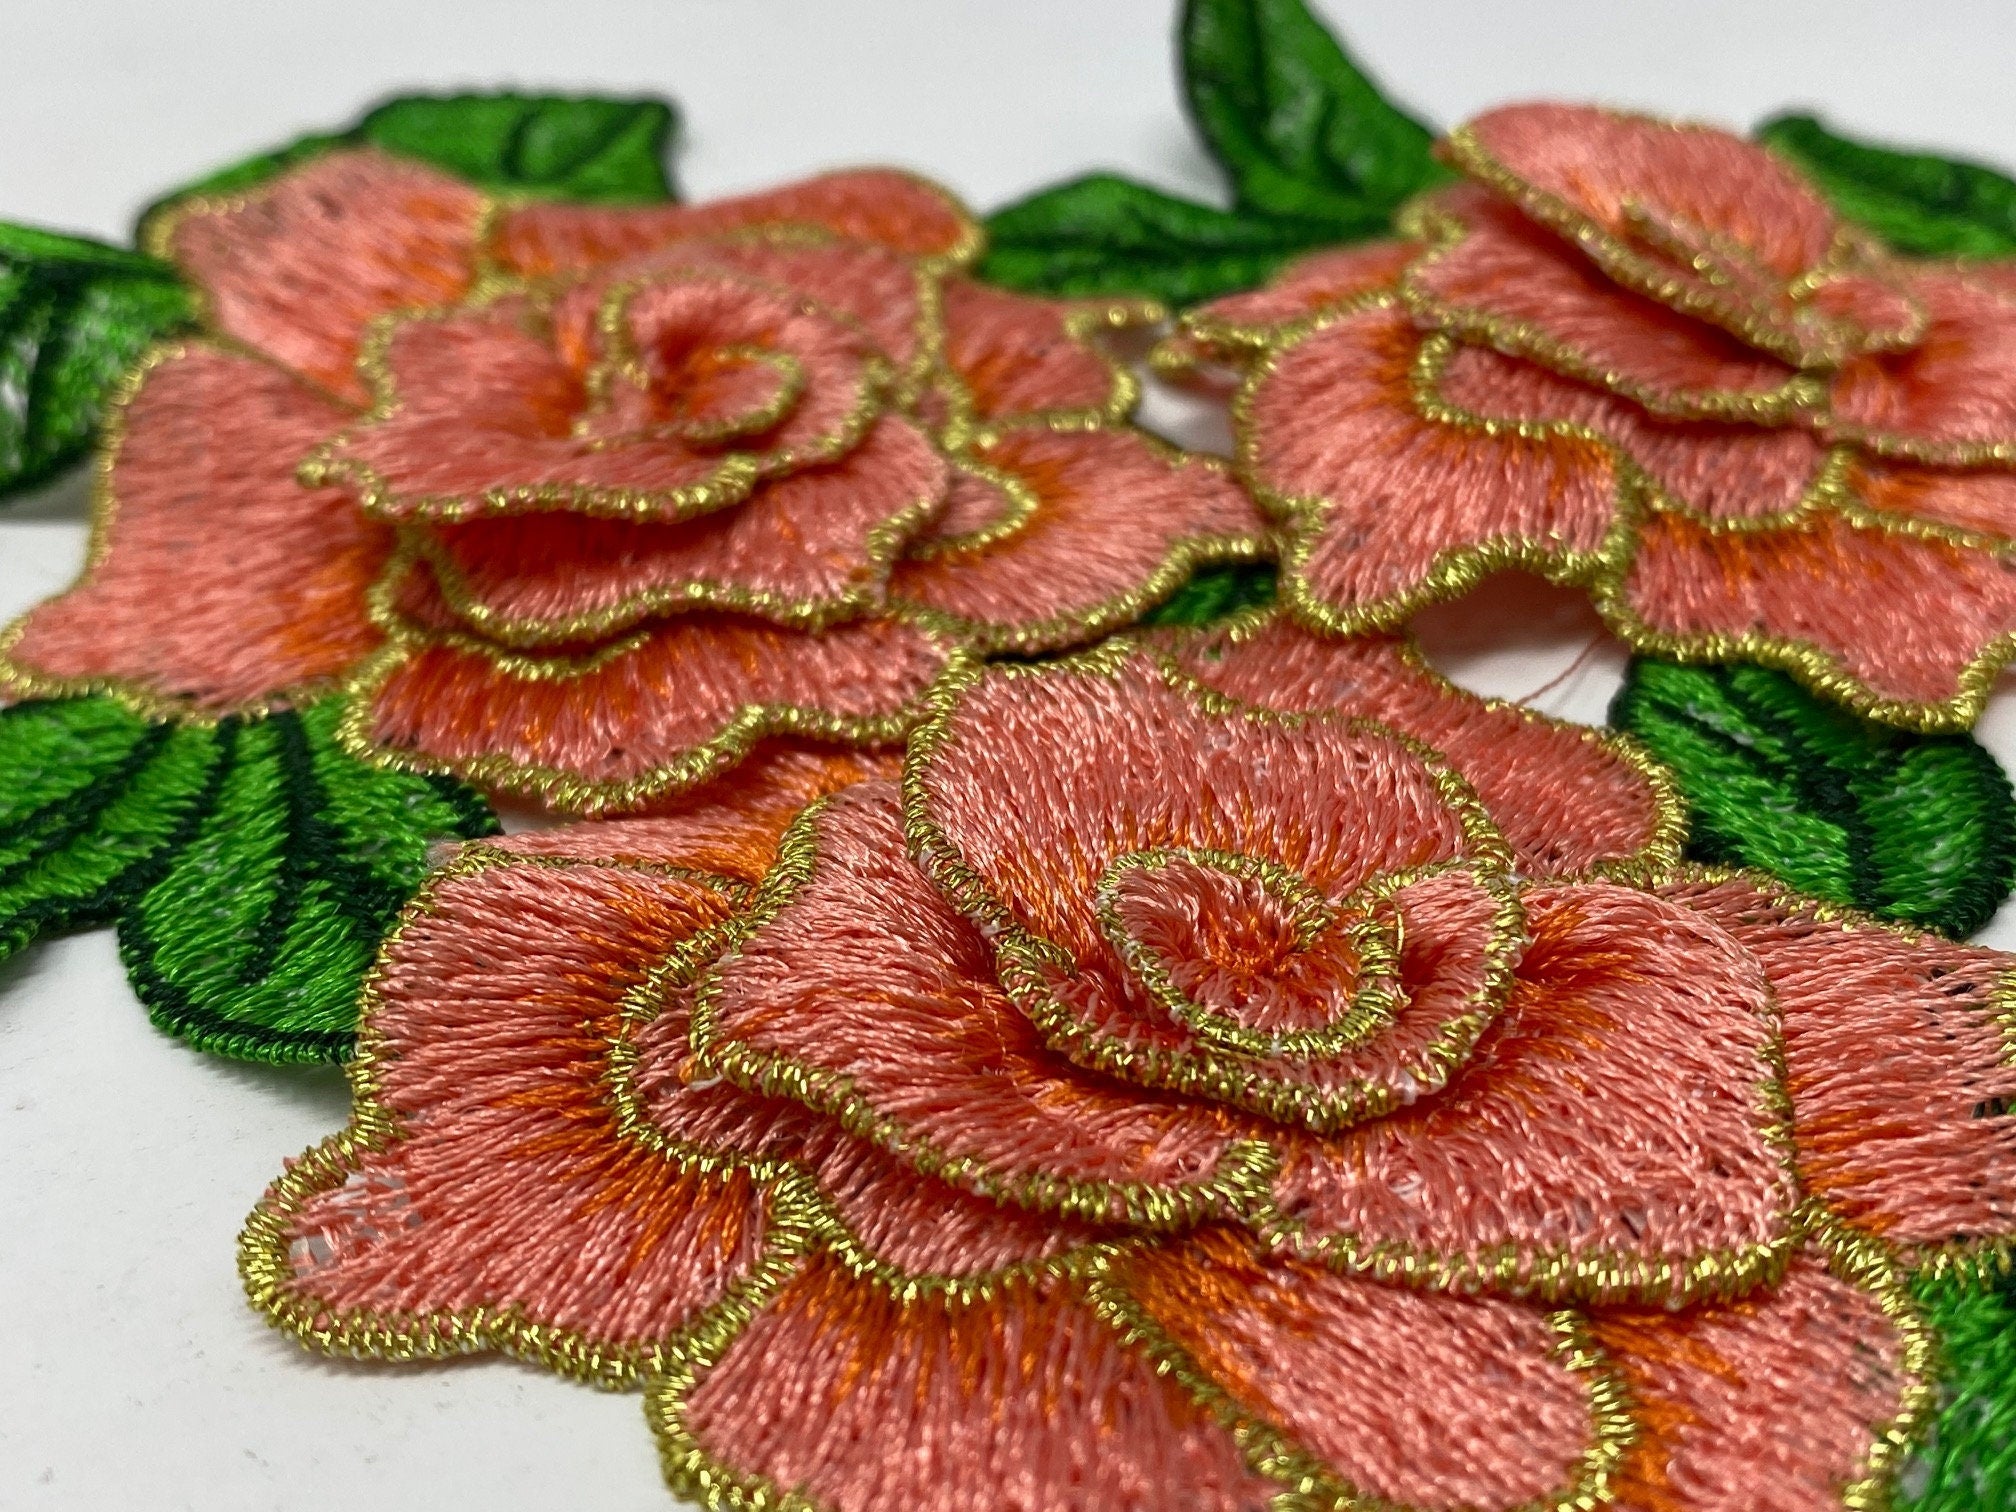 NEW, 2 pc set, Peach & Gold Roses (size 4-inches), matching lace sew-on floral patches (2 pcs),Flower Patches, Rose Lace Patches